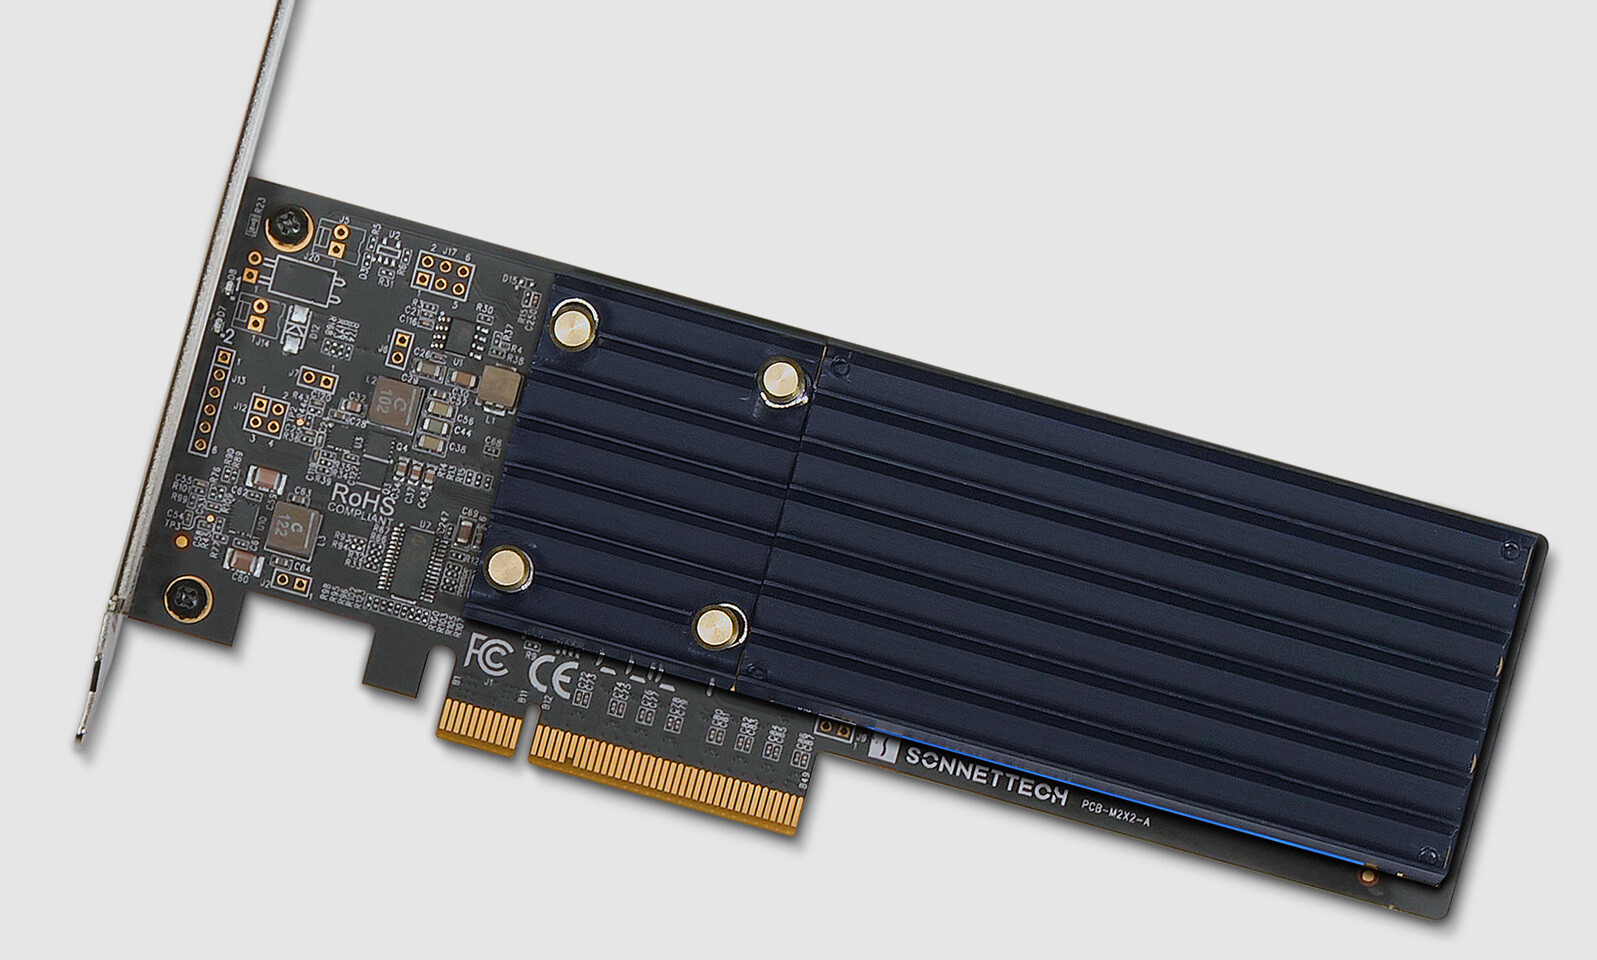 (PR) Sonnet Announces PCI Express 3.0 Adapter Card Featuring Two NVMe SSD Slots